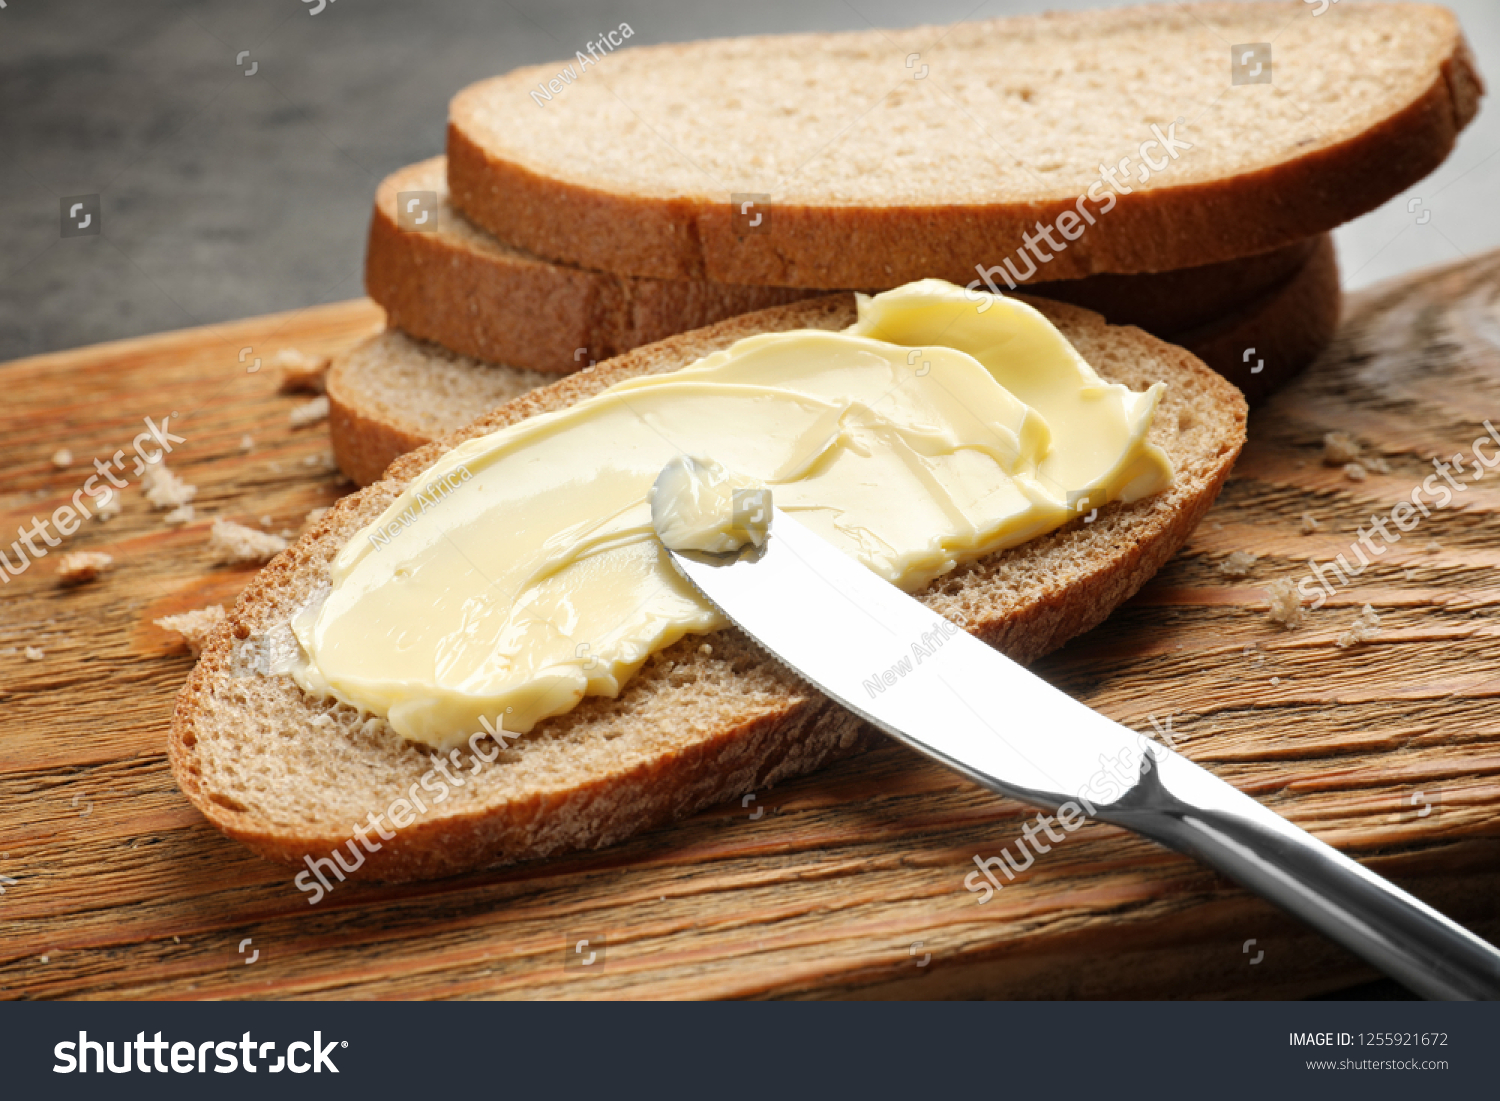 Spreading butter onto toast with knife on wooden board #1255921672